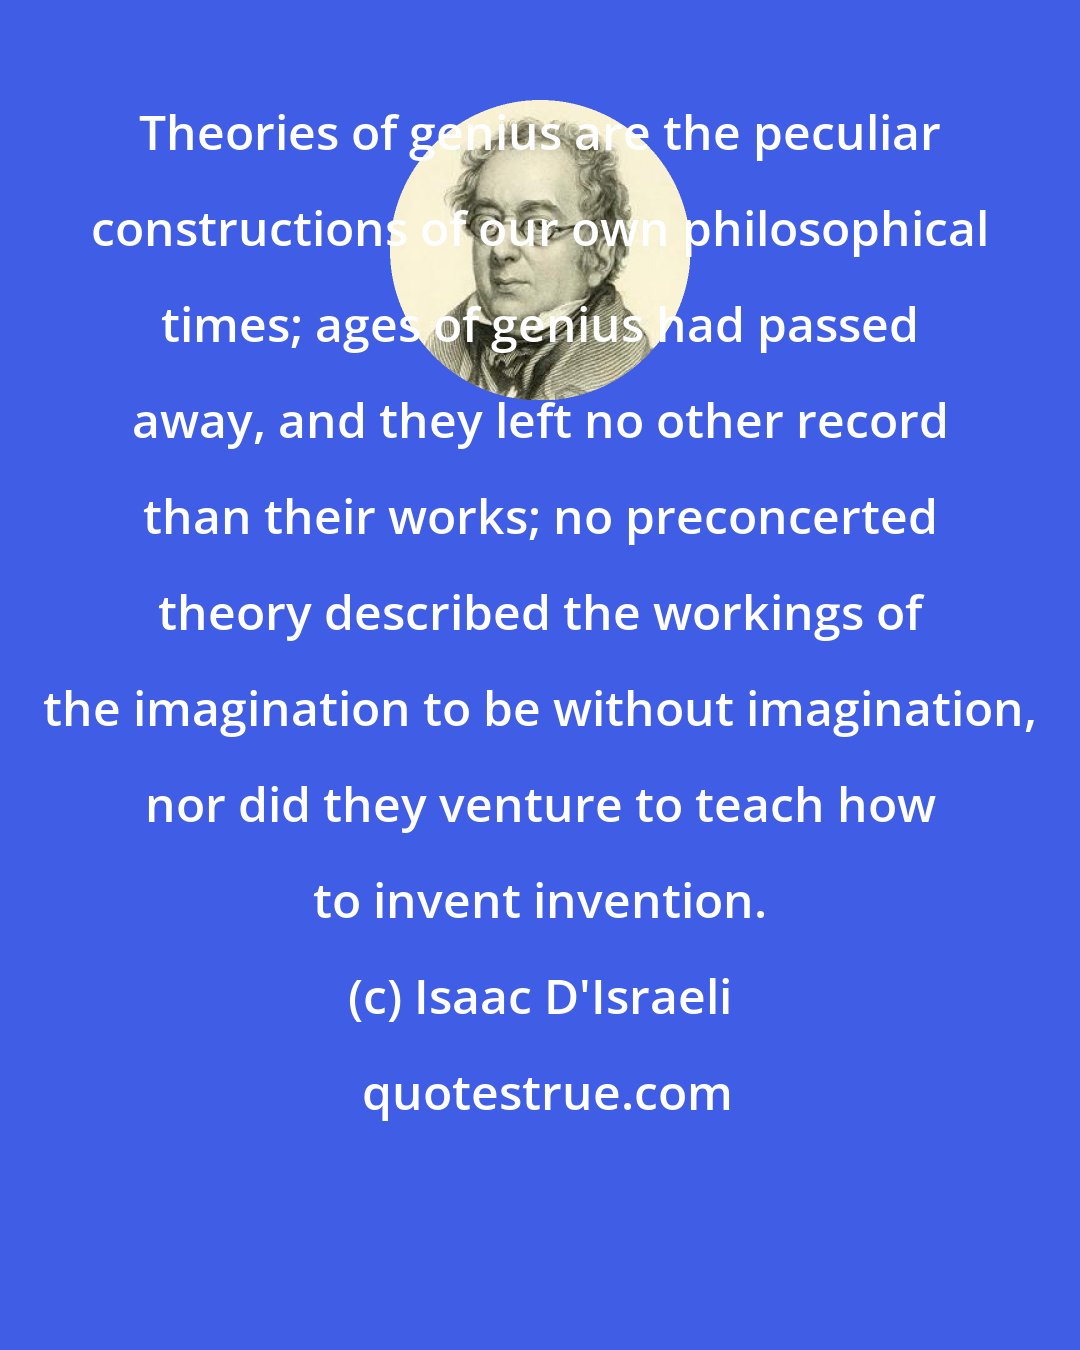 Isaac D'Israeli: Theories of genius are the peculiar constructions of our own philosophical times; ages of genius had passed away, and they left no other record than their works; no preconcerted theory described the workings of the imagination to be without imagination, nor did they venture to teach how to invent invention.